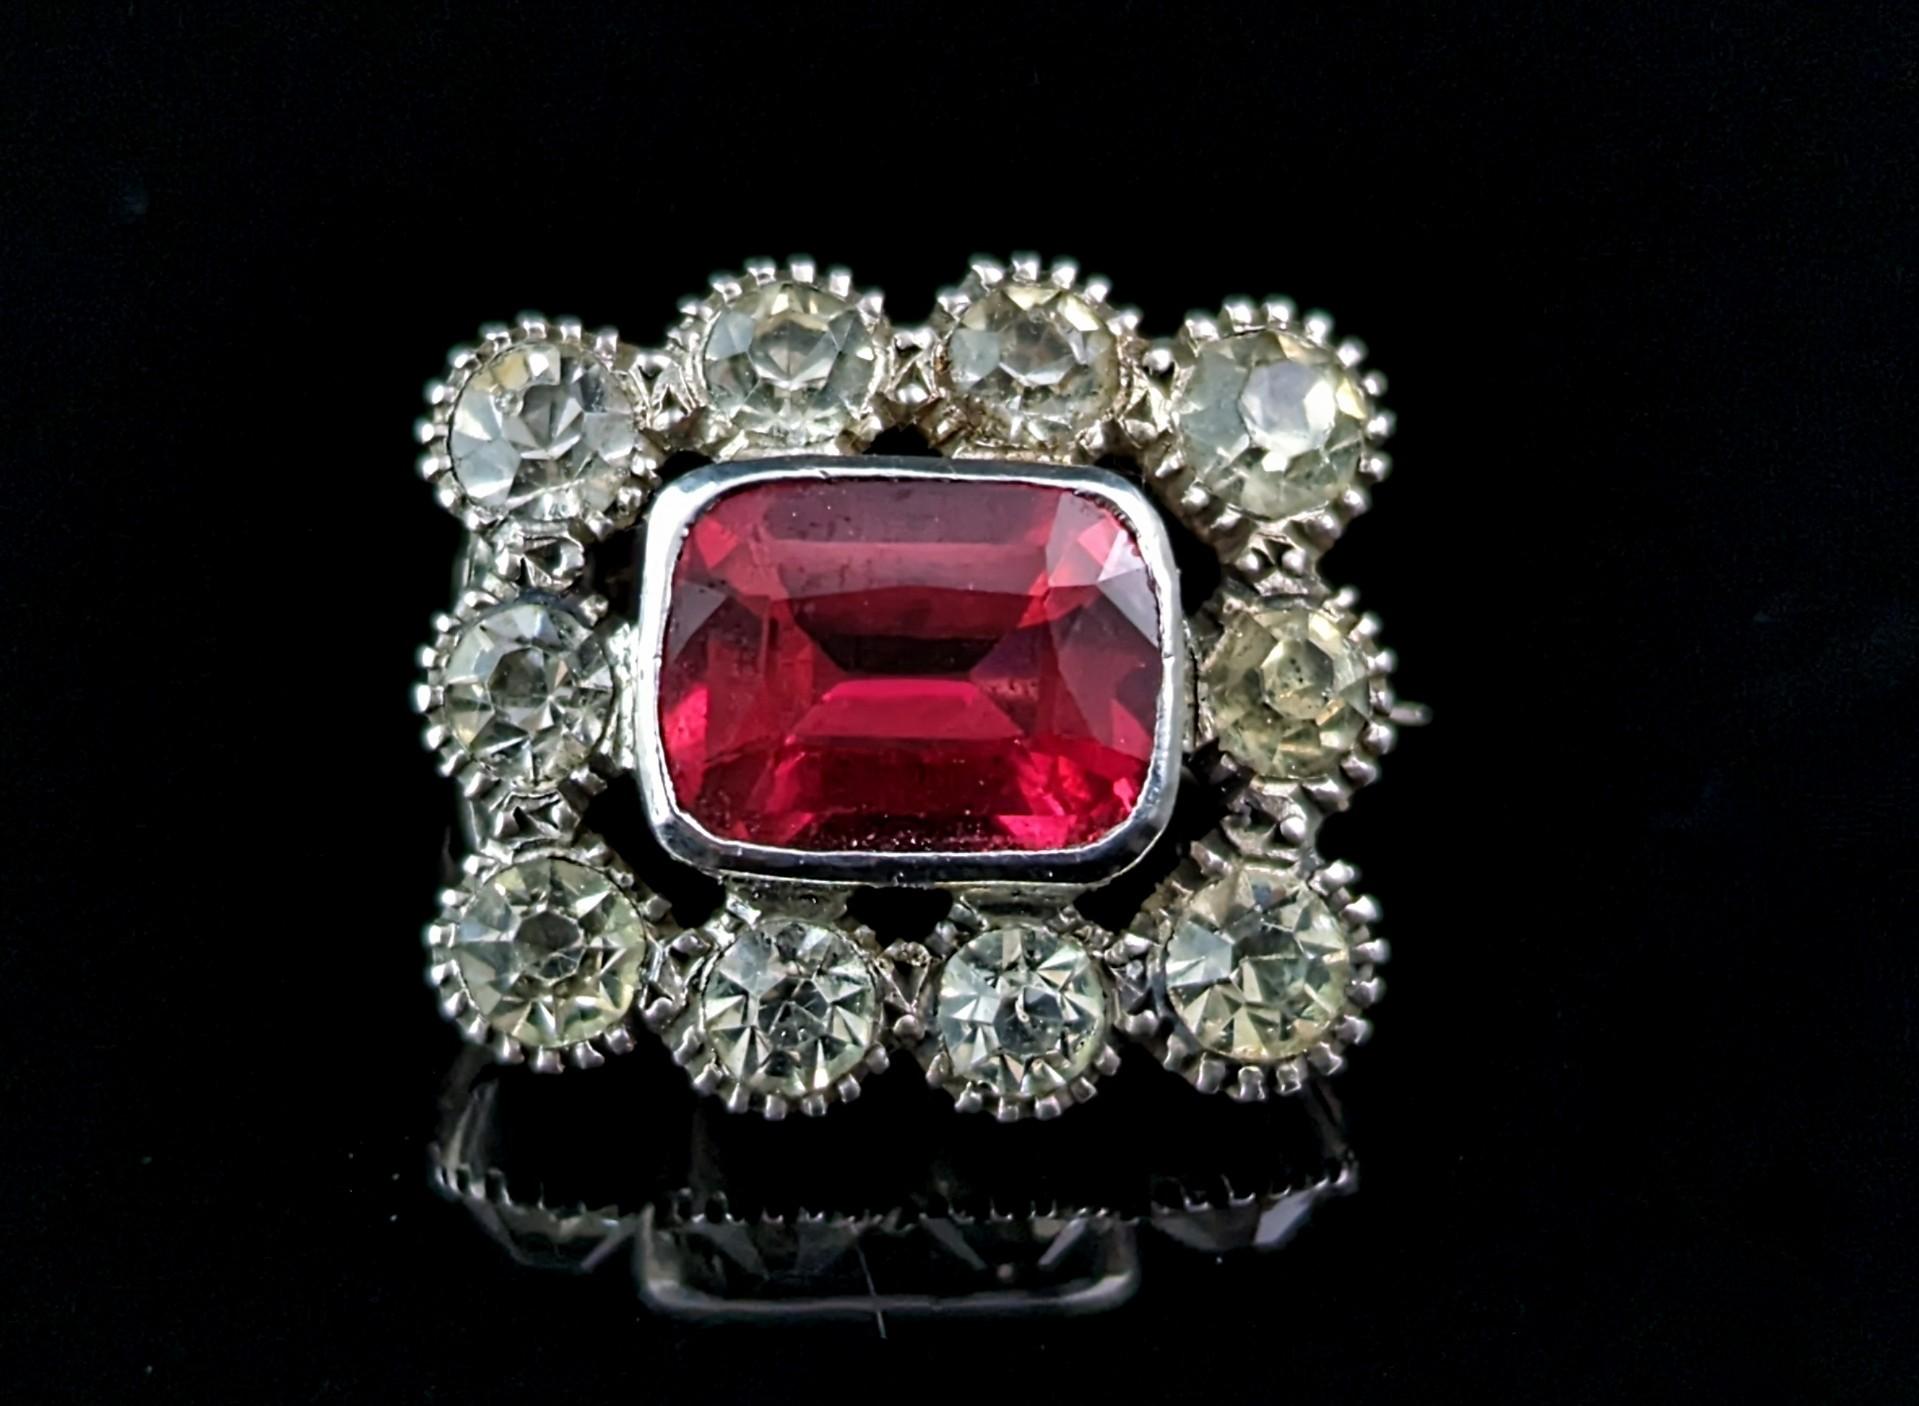 A sweet little antique sterling silver and paste lace pin or brooch.

It is crafted in sterling silver with a halo of clear paste stones surrounding a faceted emerald cut red paste stone.

Due to it's small size it was most probably a lace pin, used